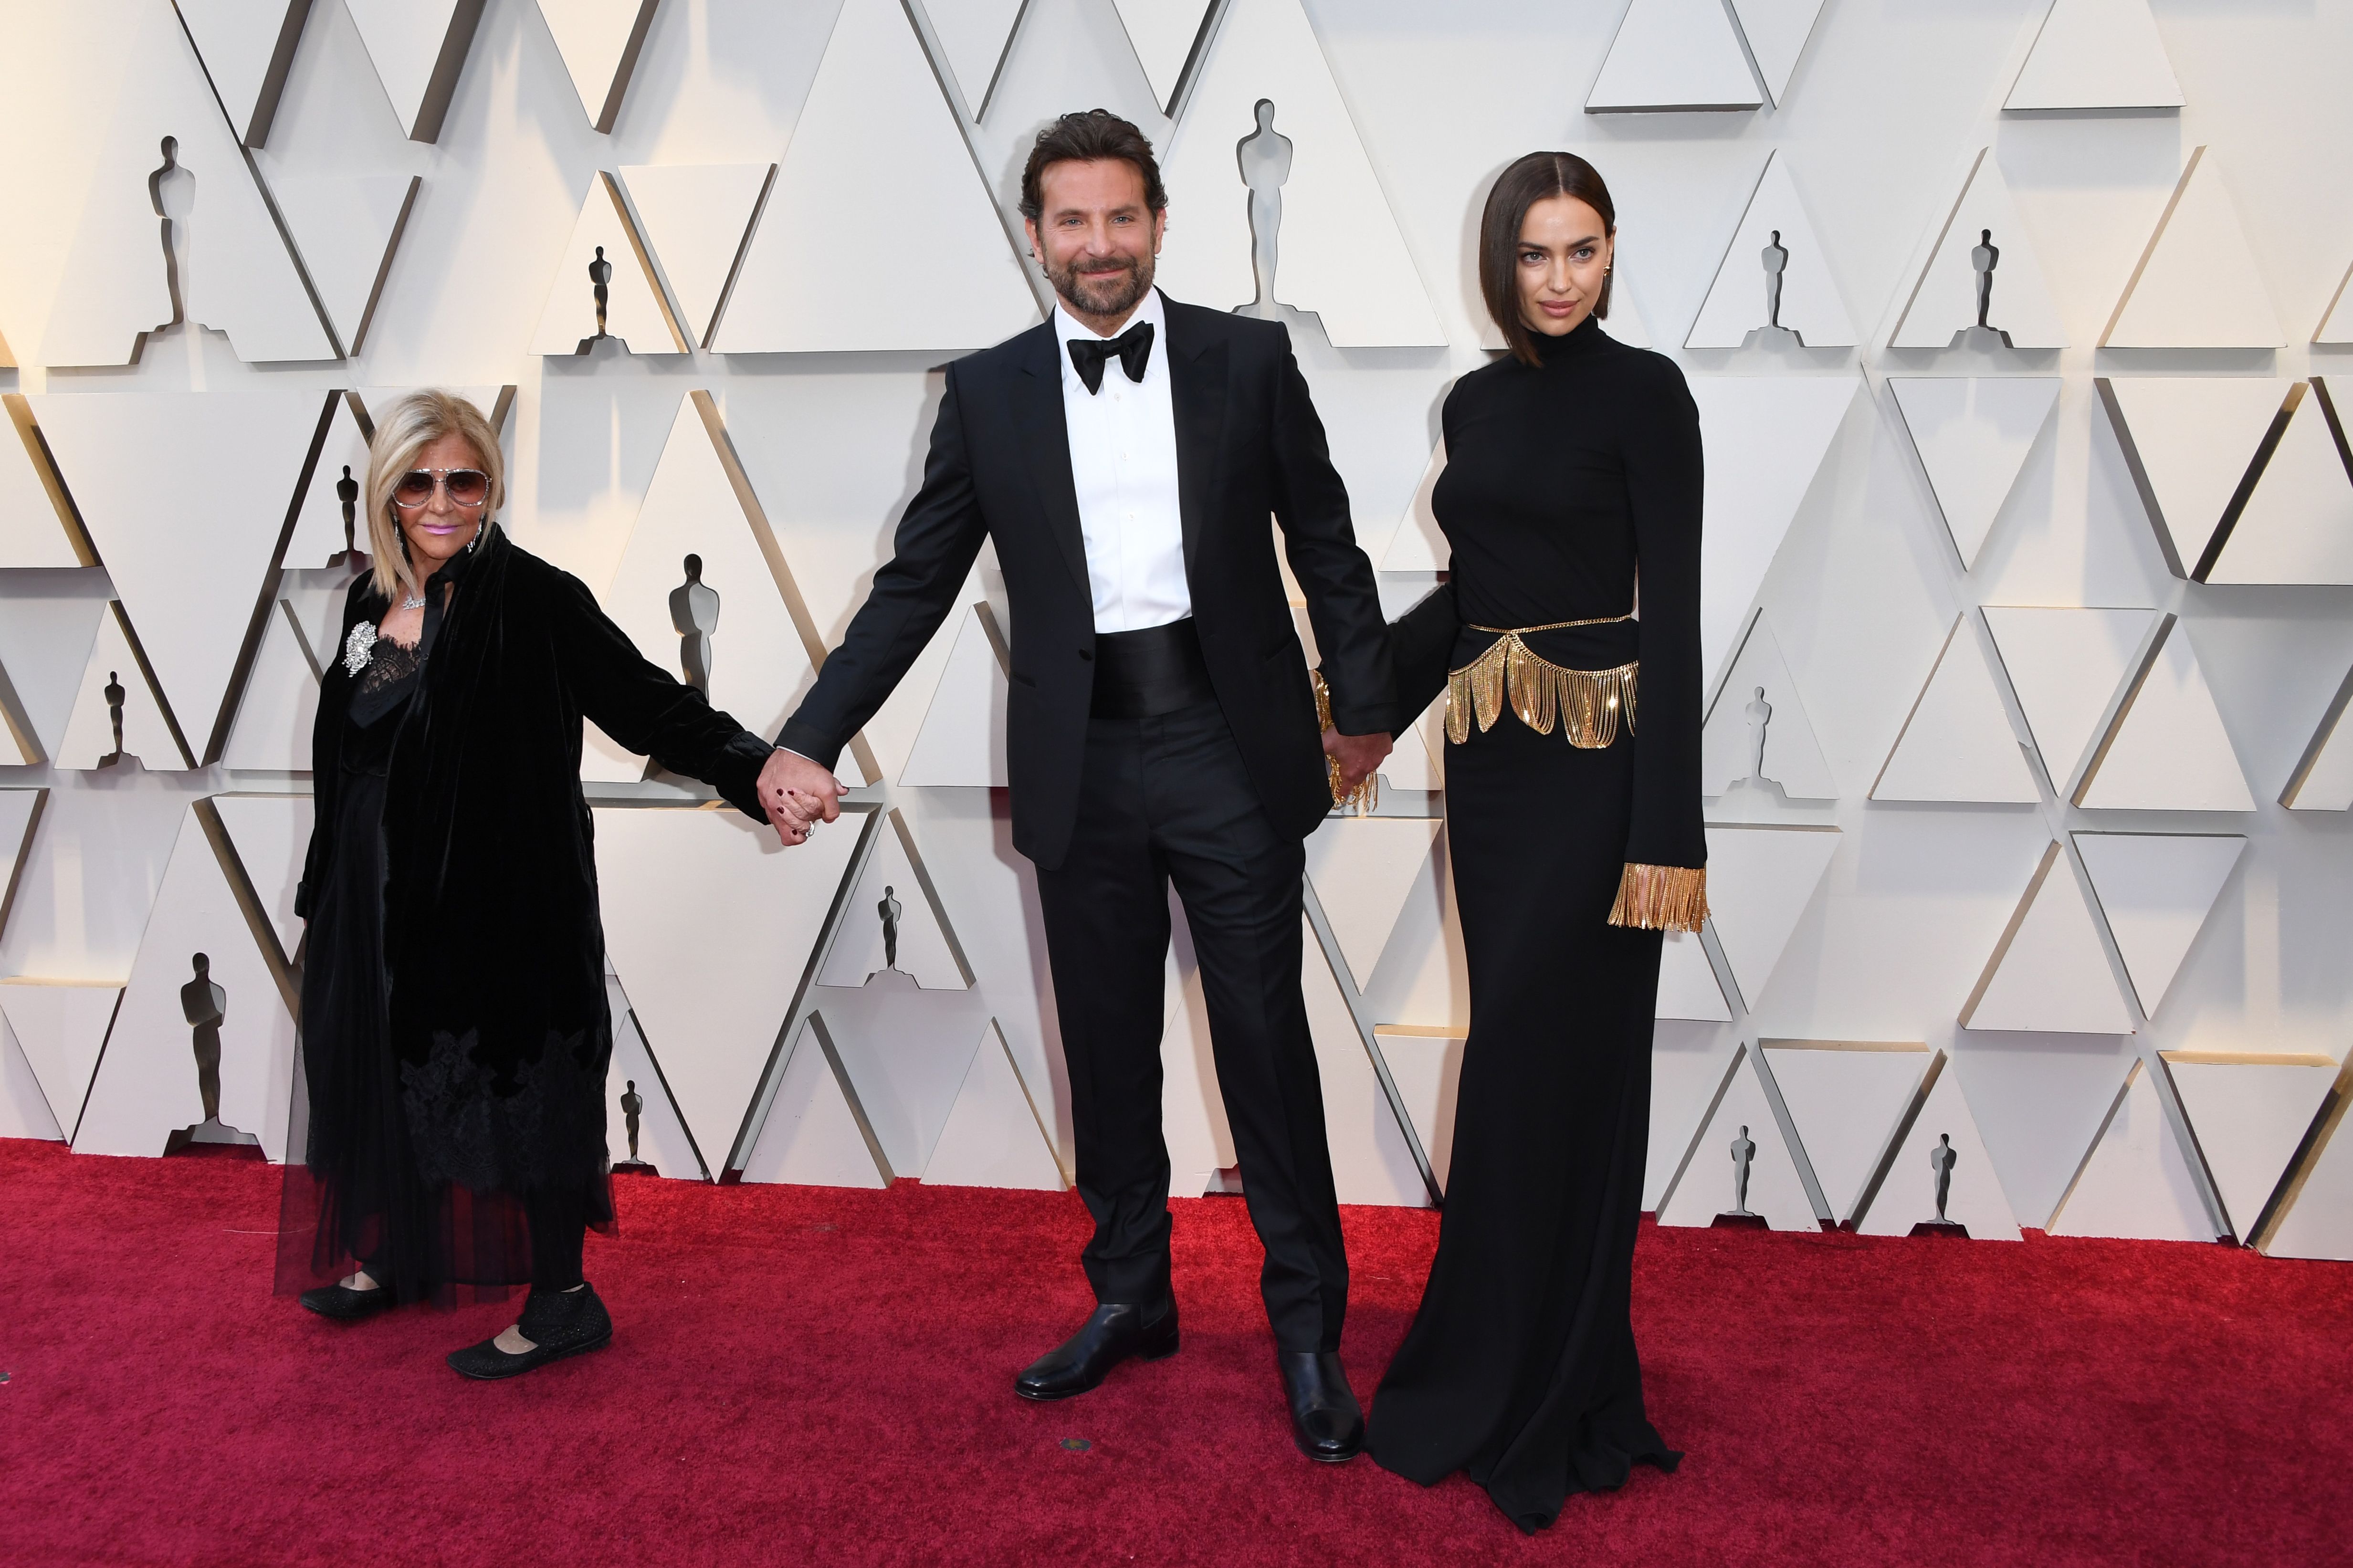 Gloria Campano, Bradley Cooper, and Irina Shayk at the 91st Annual Oscar Awards in 2019 | Source: Getty Images